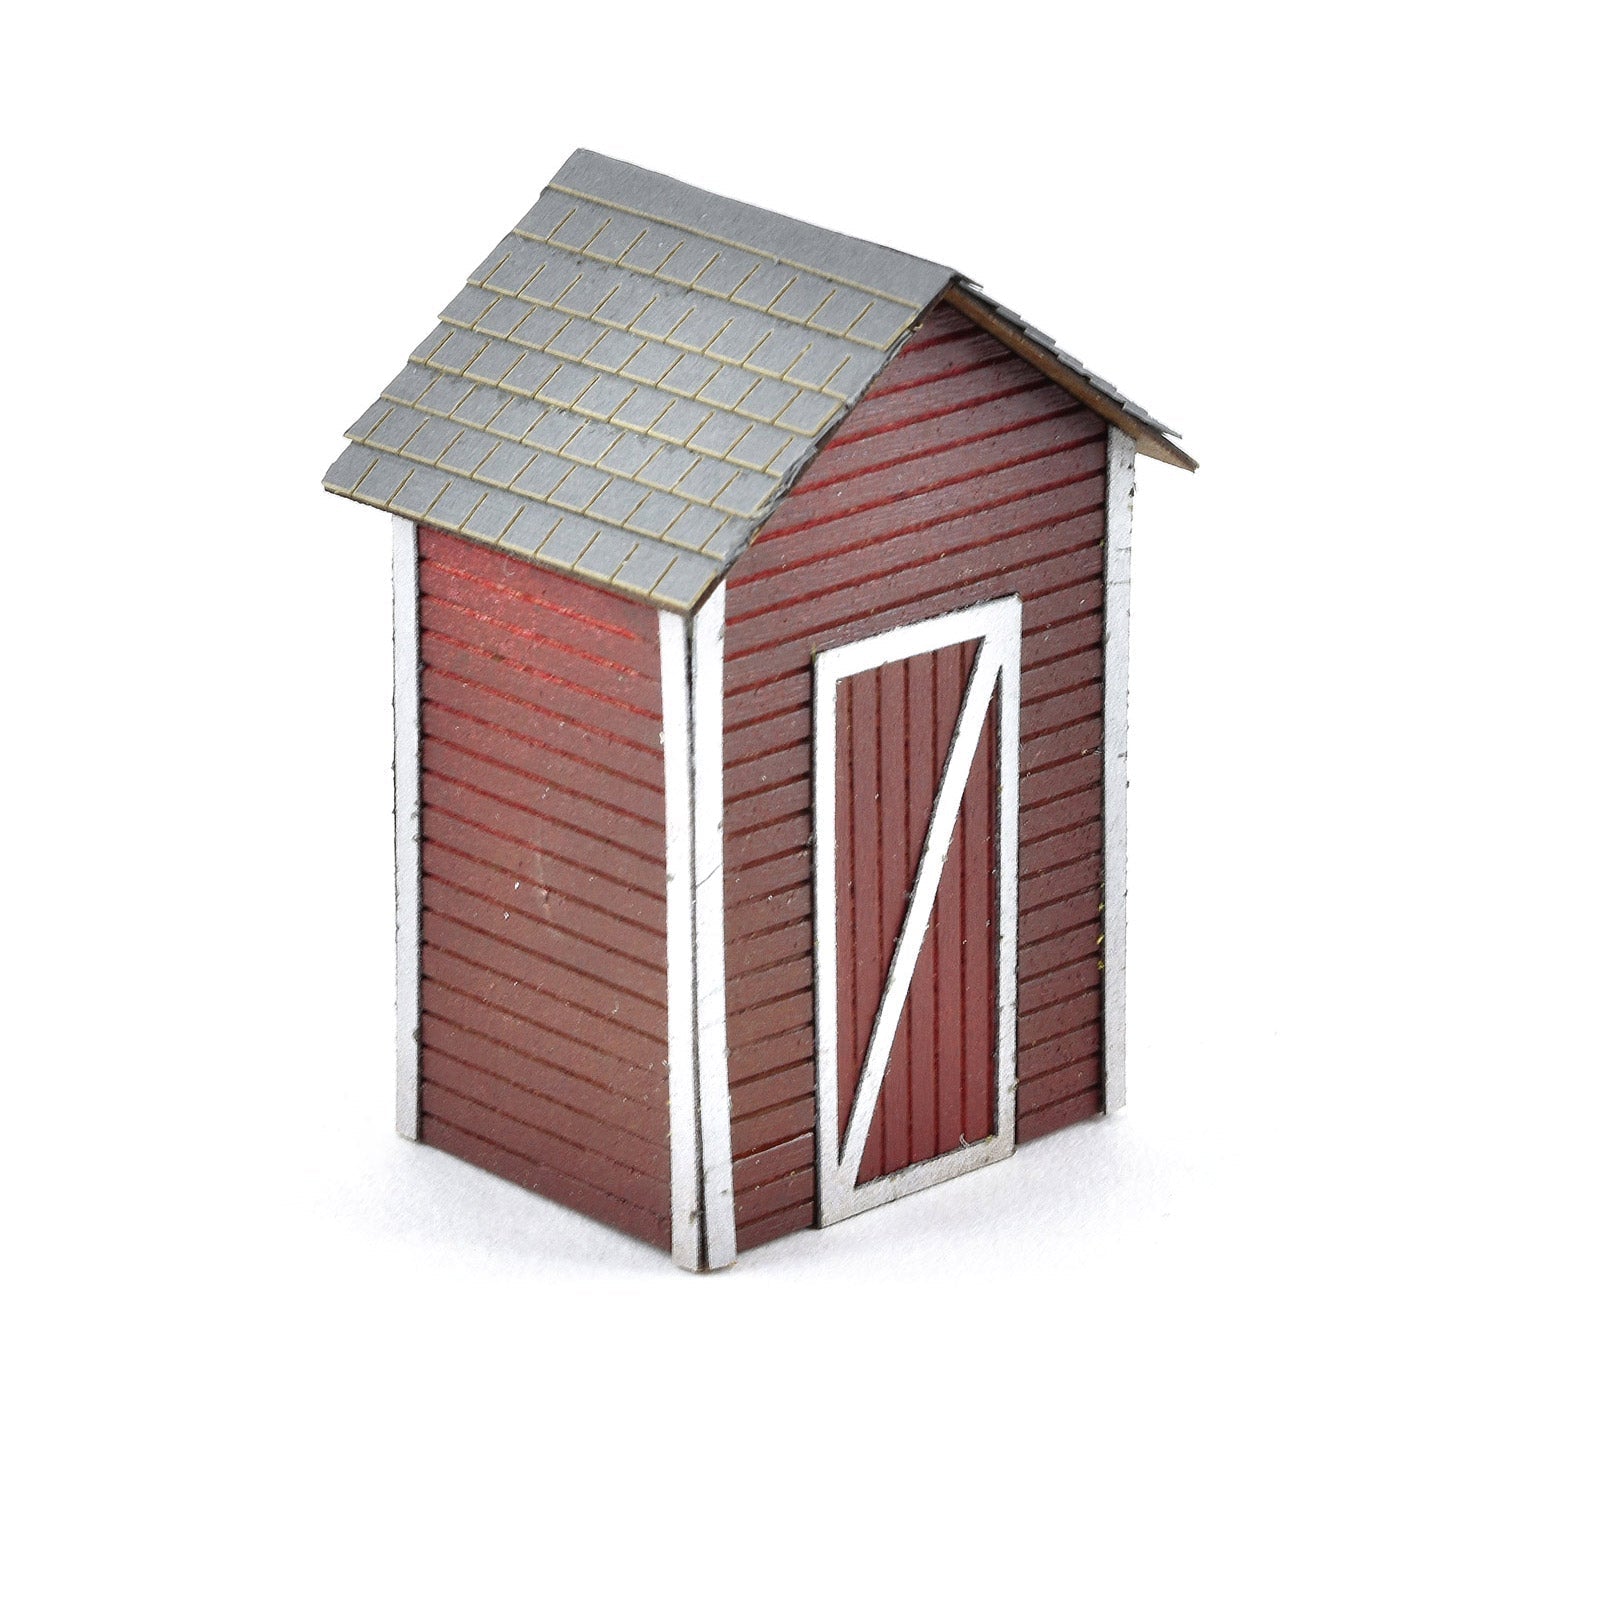 Single Occupancy Outdoor Lavatory Kit, O Scale, By Scientific